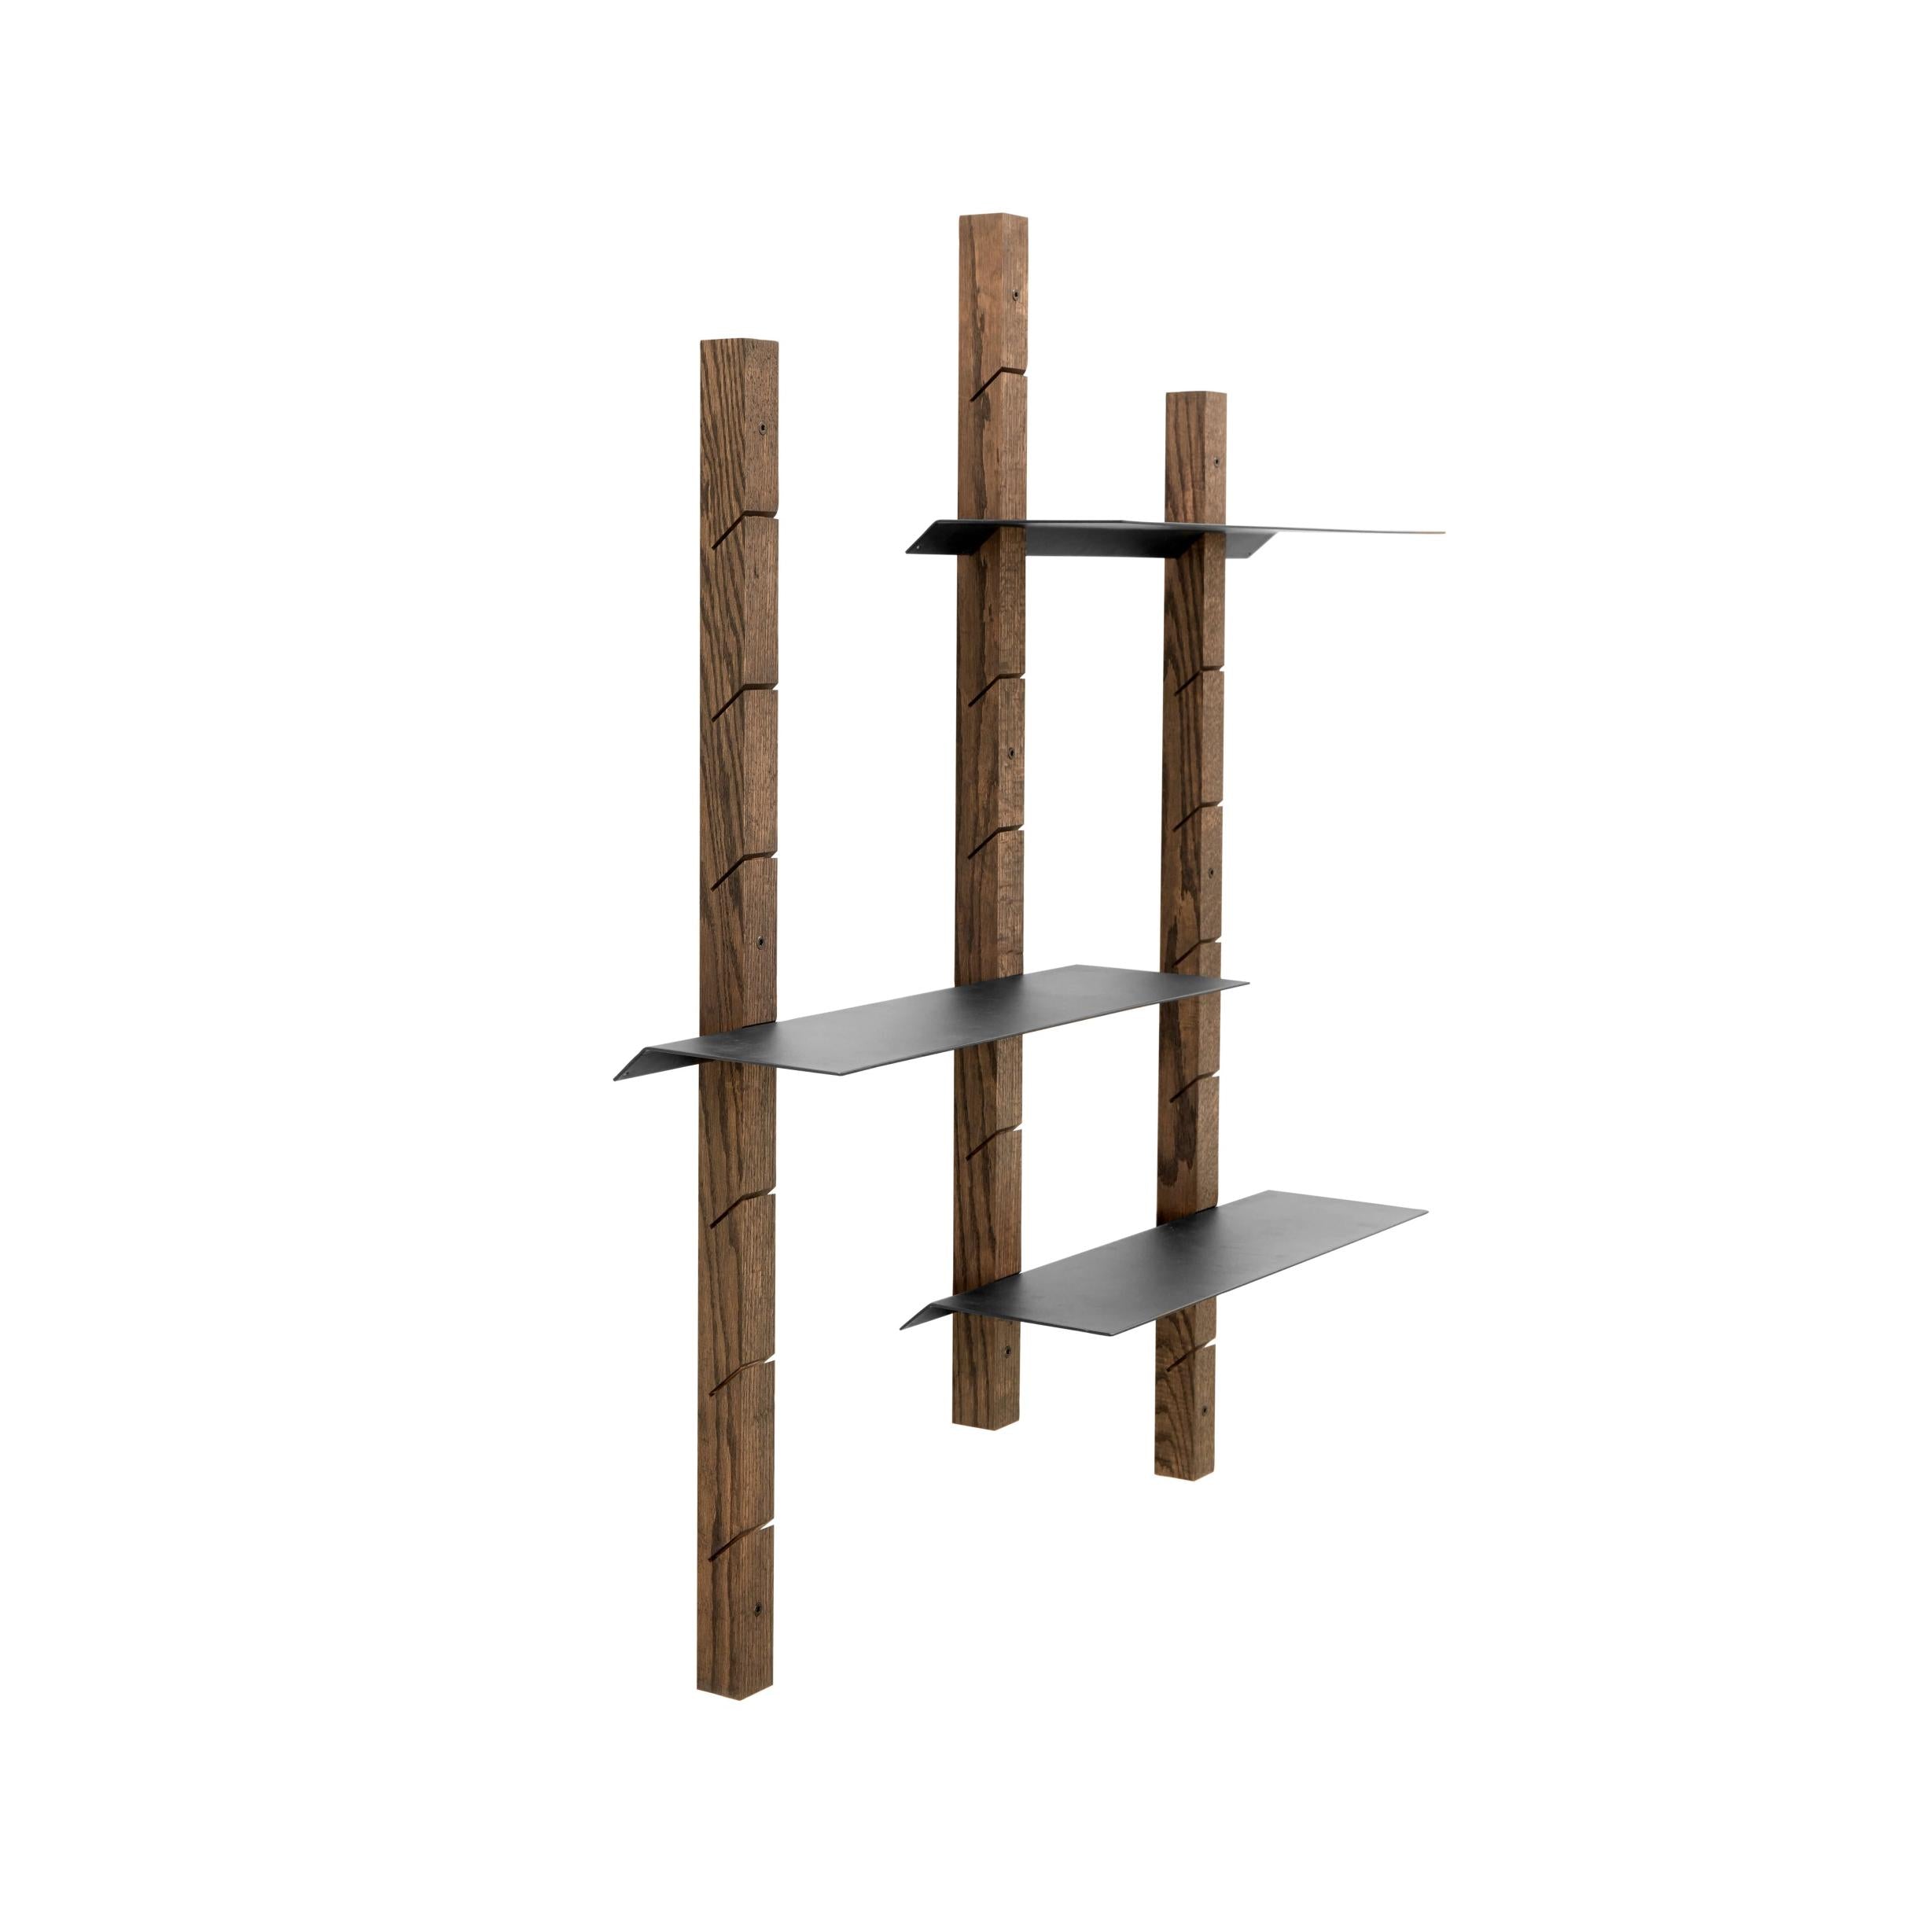 Muubs Oaks Shelving System Stained Oak, 120 cm